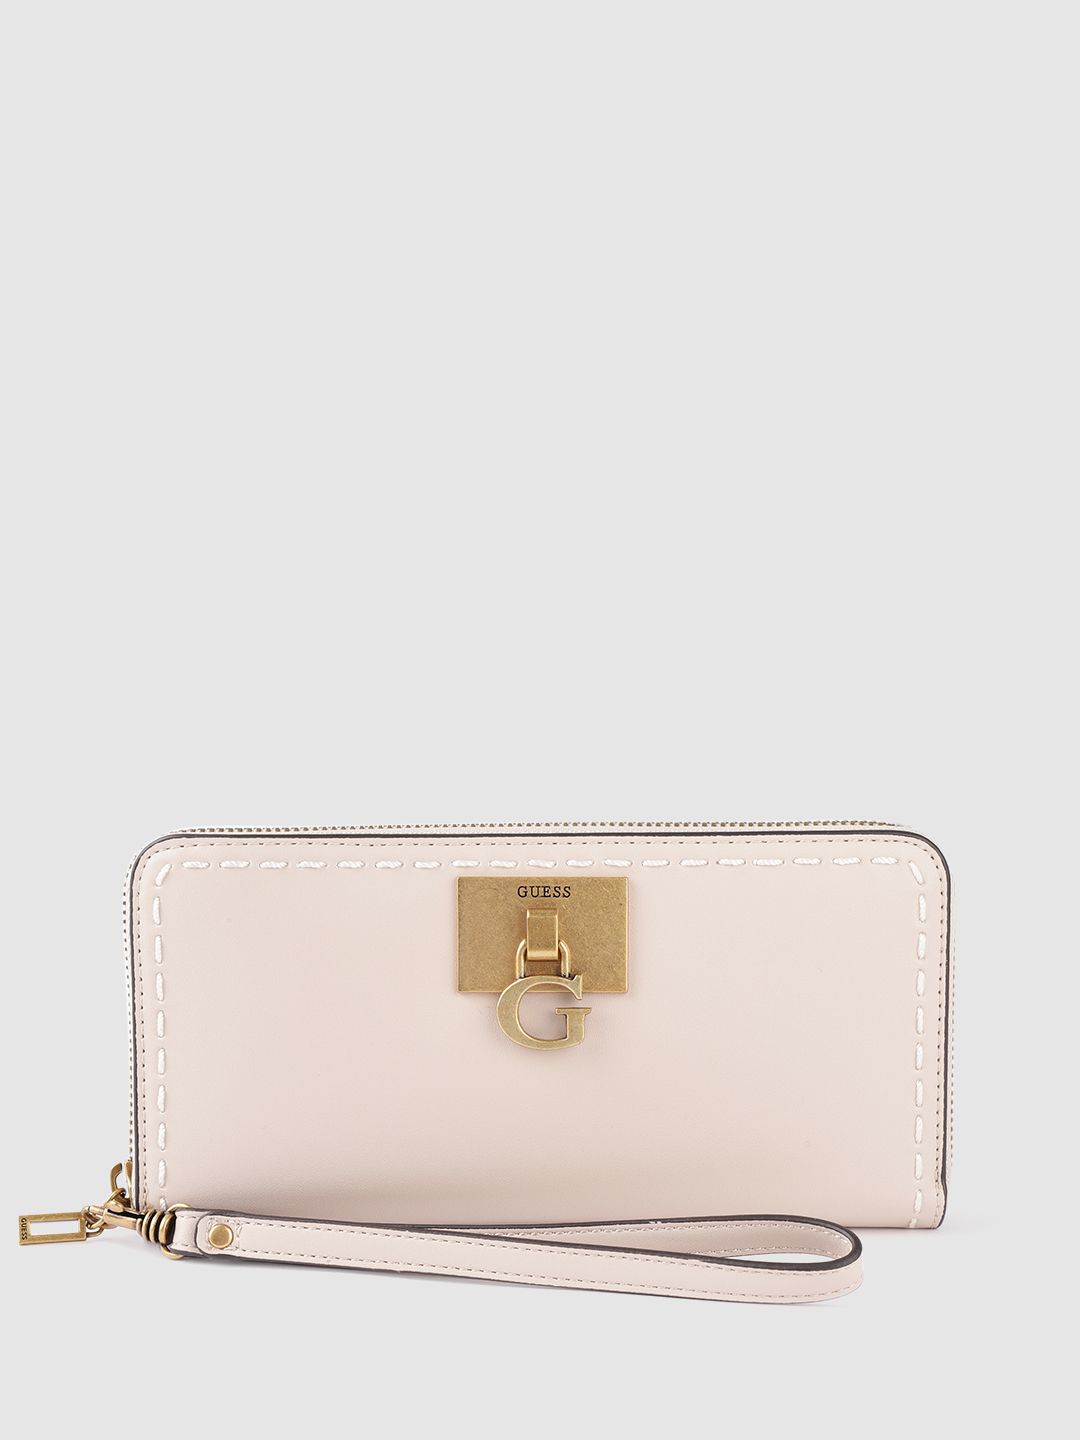 GUESS Women Nude-Coloured Solid Zip Around Wallet Price in India